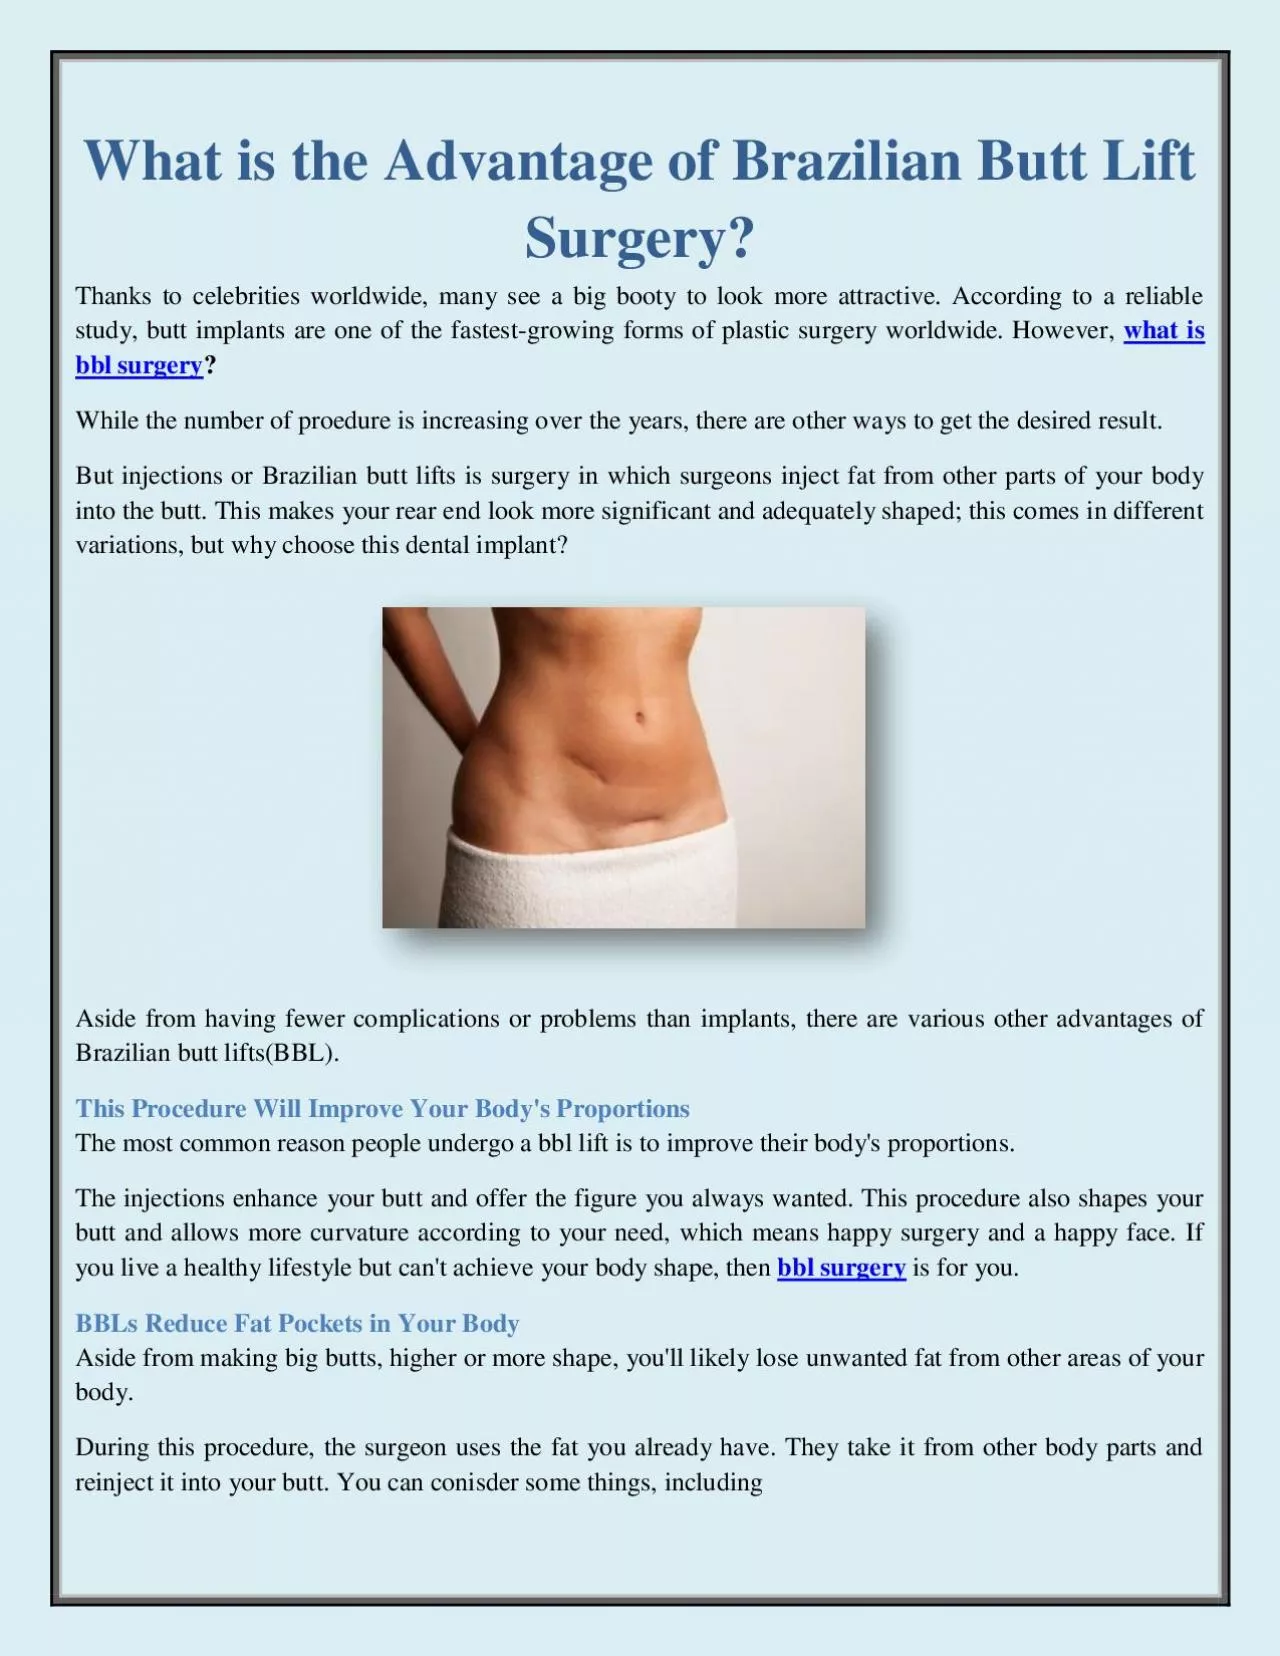 What is the Advantage of Brazilian Butt Lift Surgery?